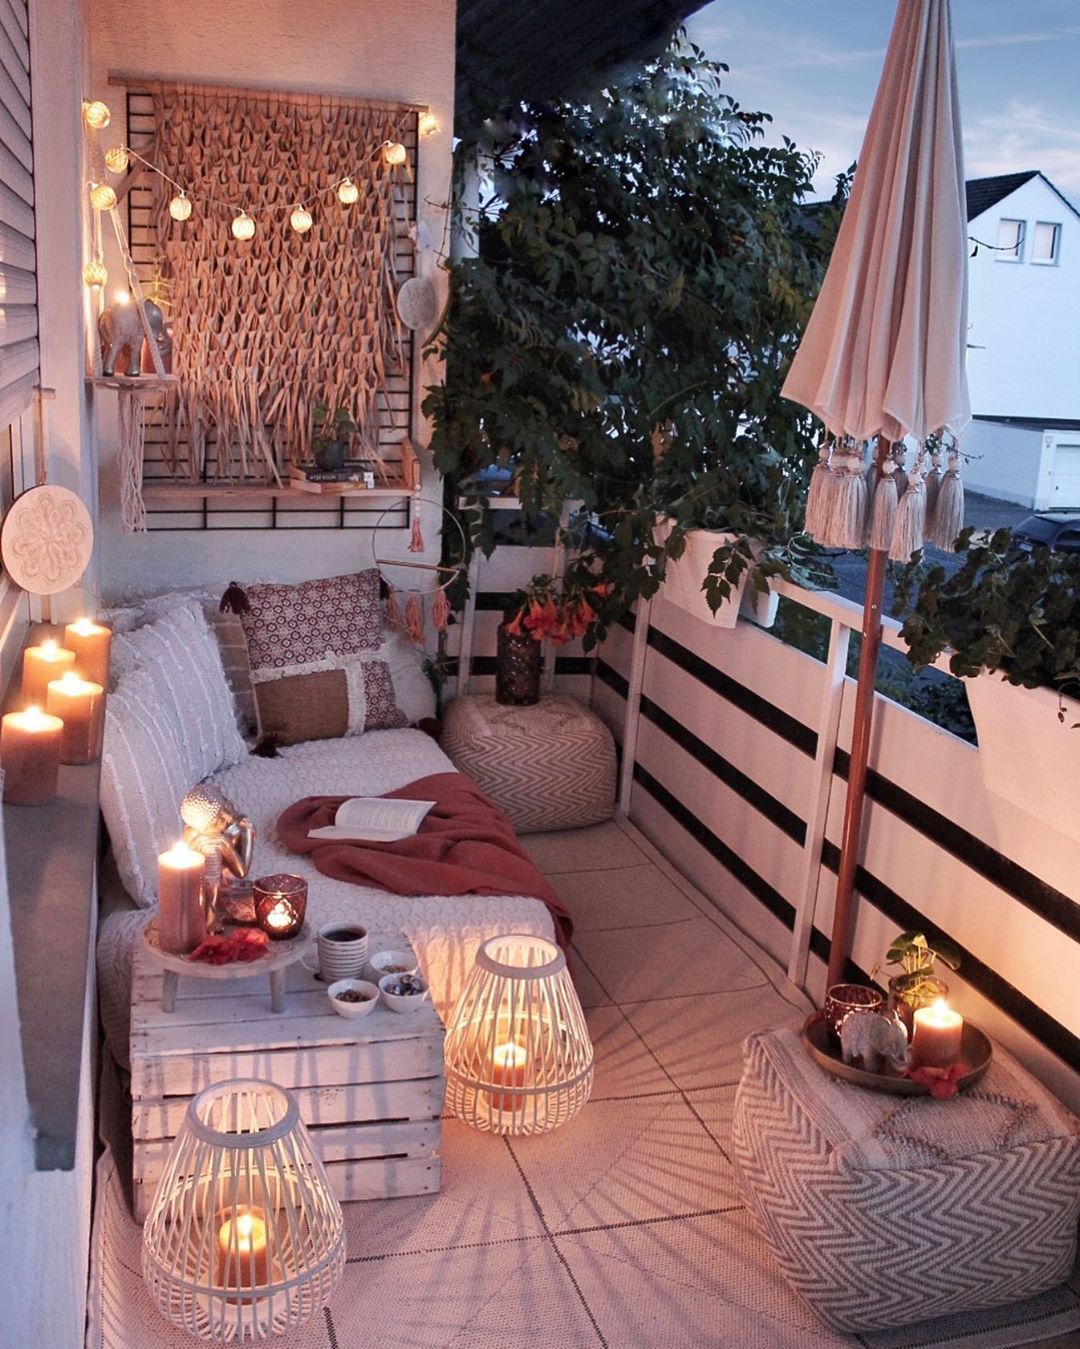 Outdoor Lighting Ideas to Make the Most of Your Space - Outdoor Lighting Ideas to Make the Most of Your Space -   16 diy Apartment patio ideas